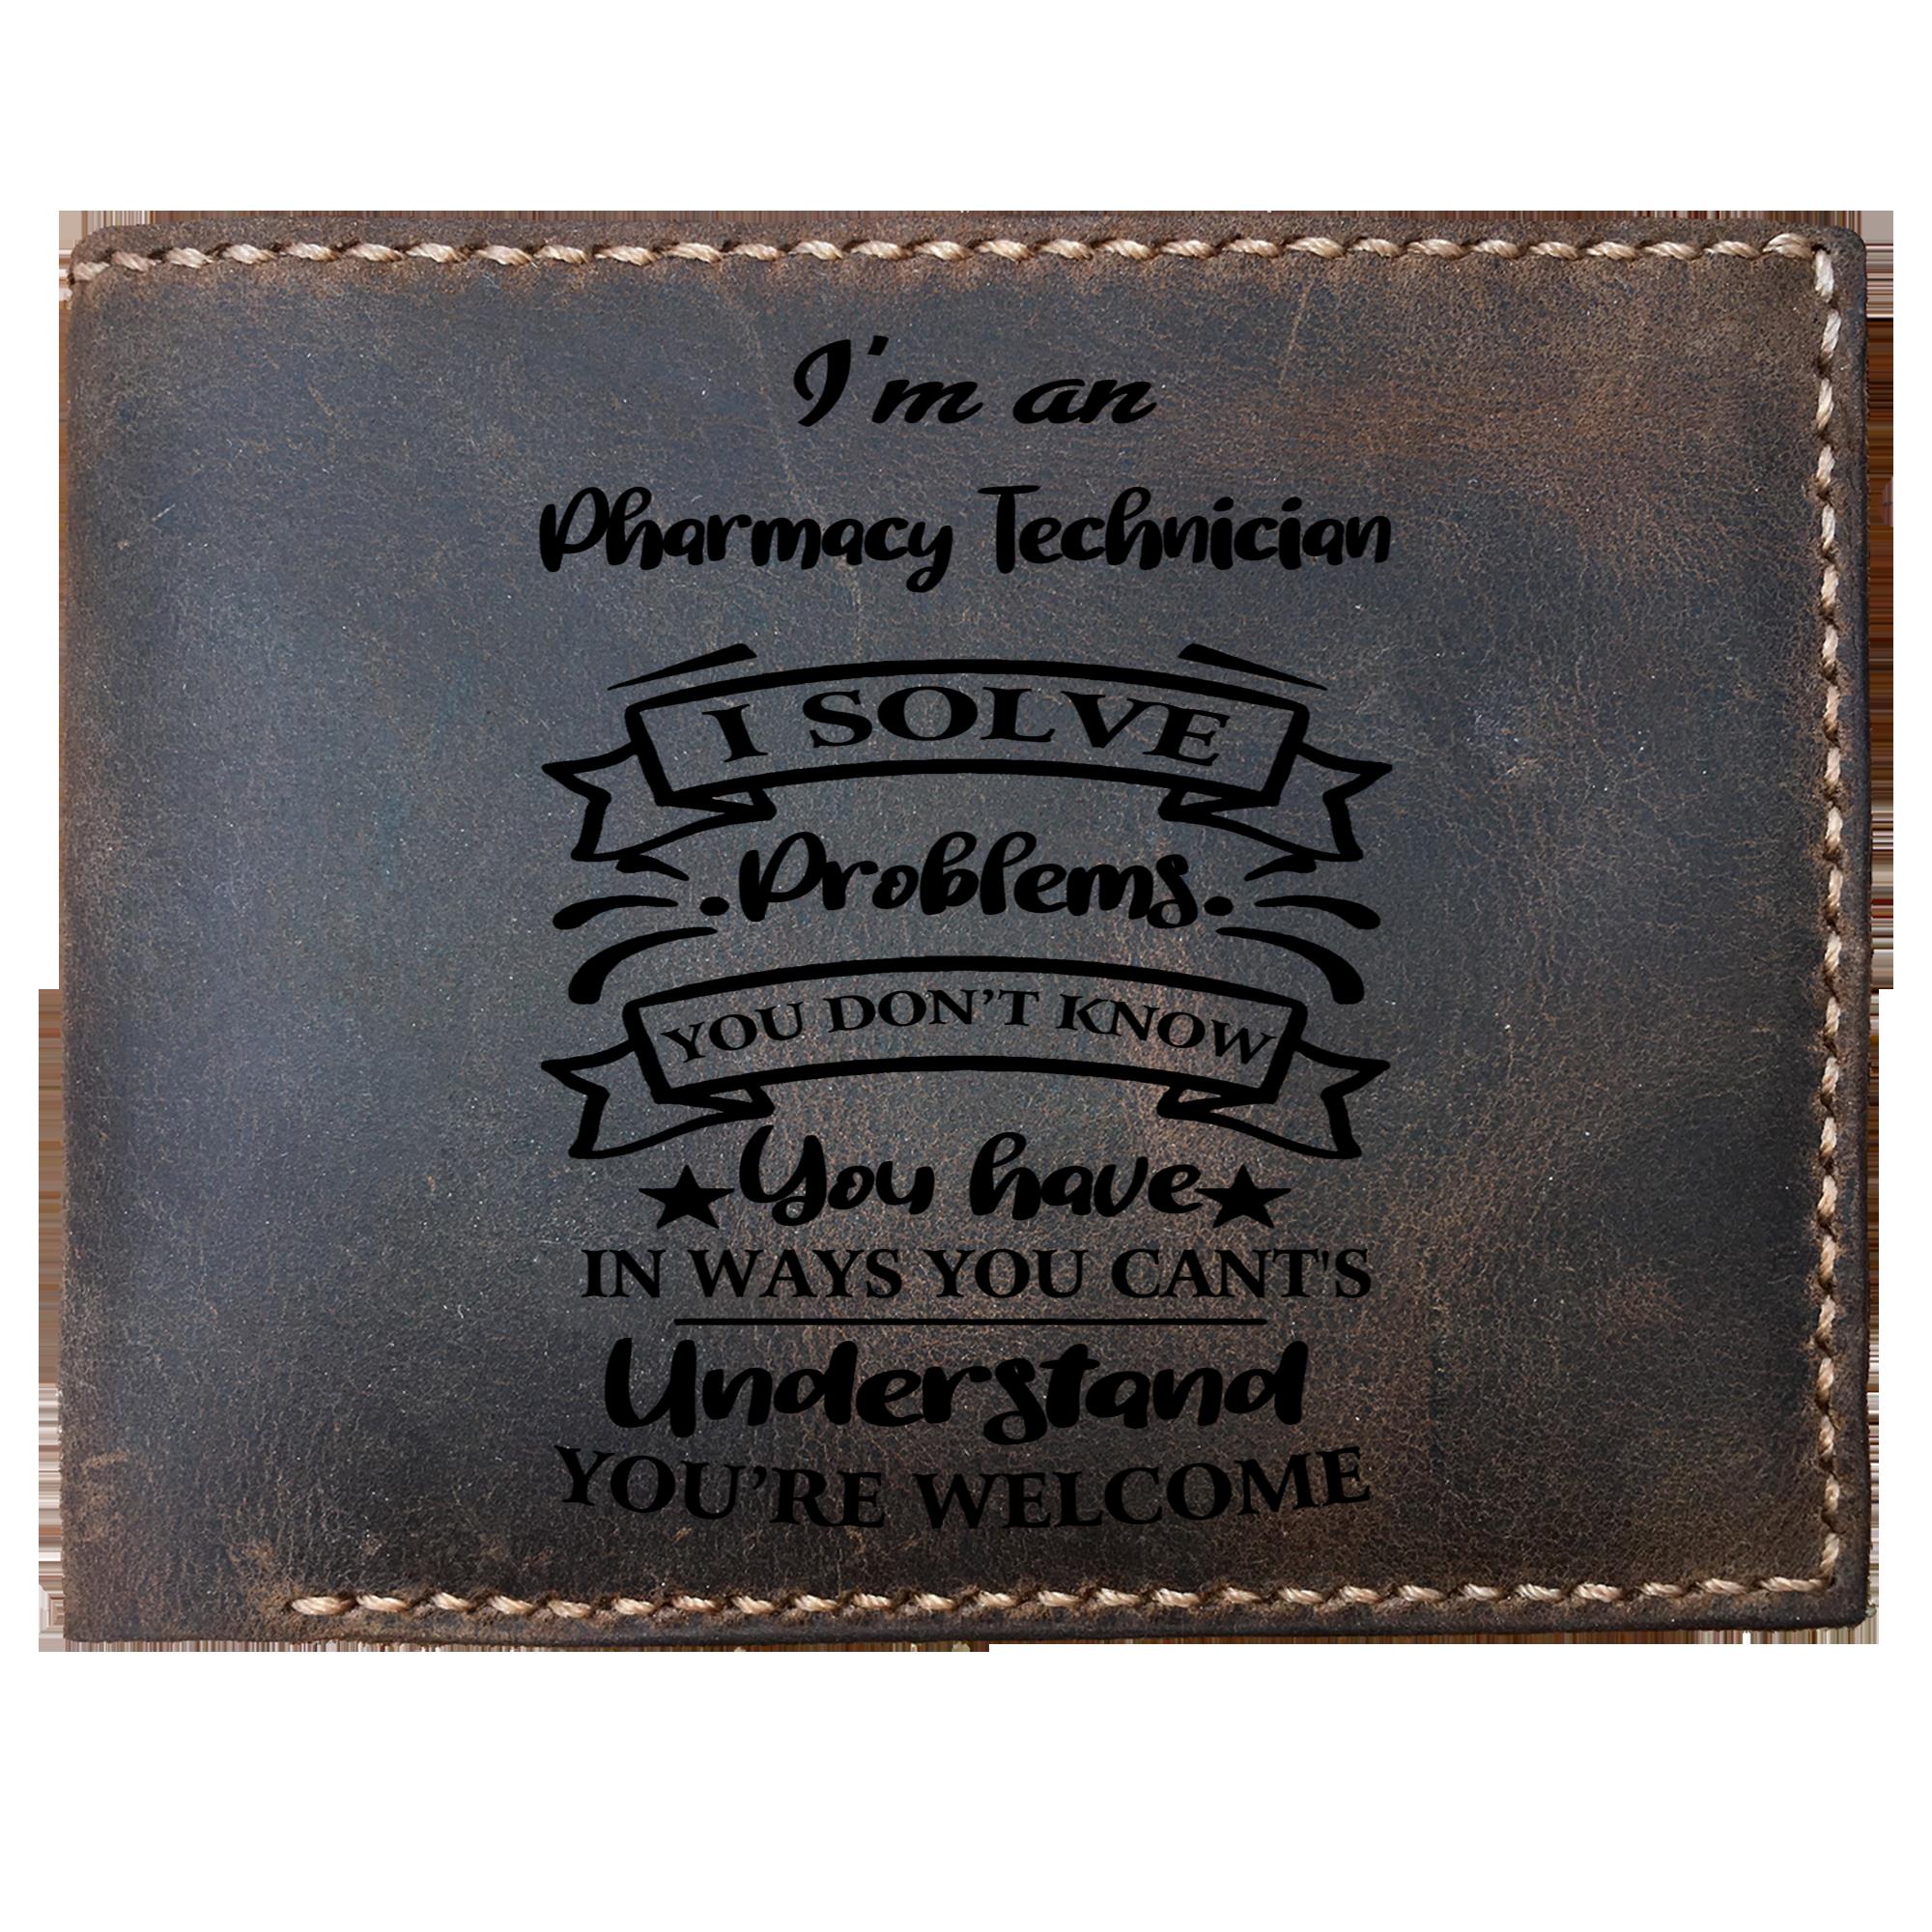 Skitongifts Funny Custom Laser Engraved Bifold Leather Wallet For Men, I'm an Pharmacy Technician Solve Problems, Father's Day Gifts